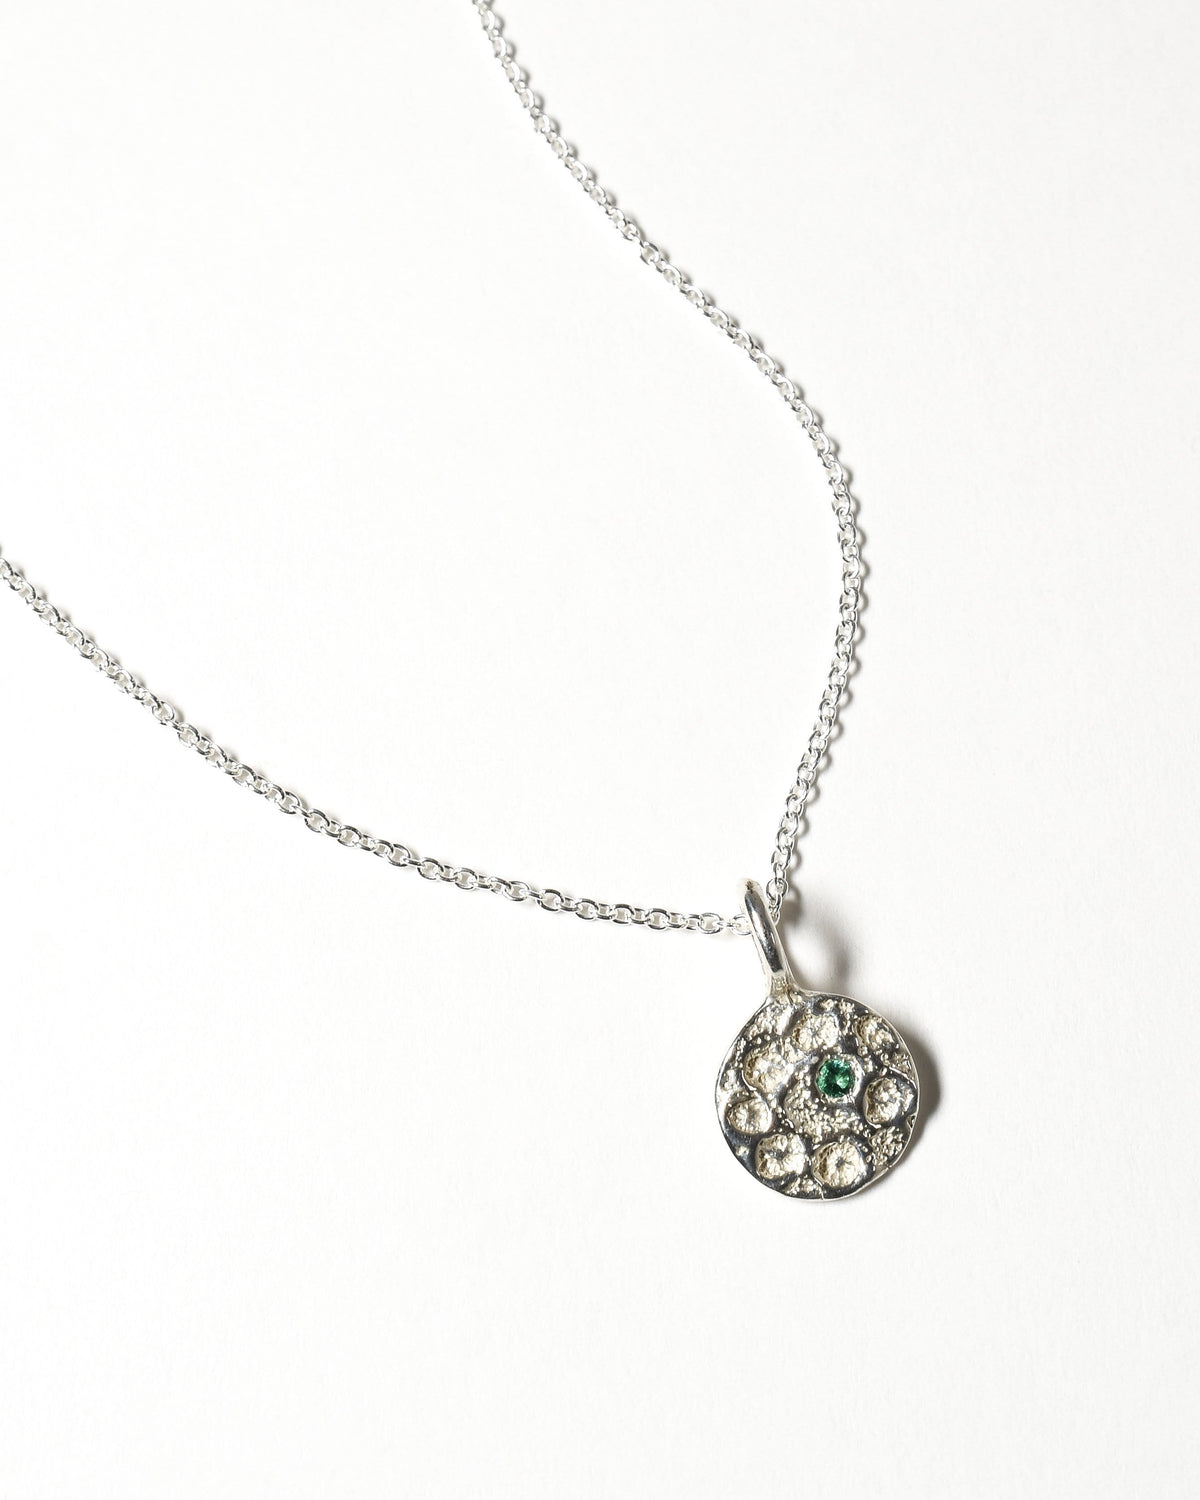 Emerald Birthstone Necklace - May - Sterling Silver